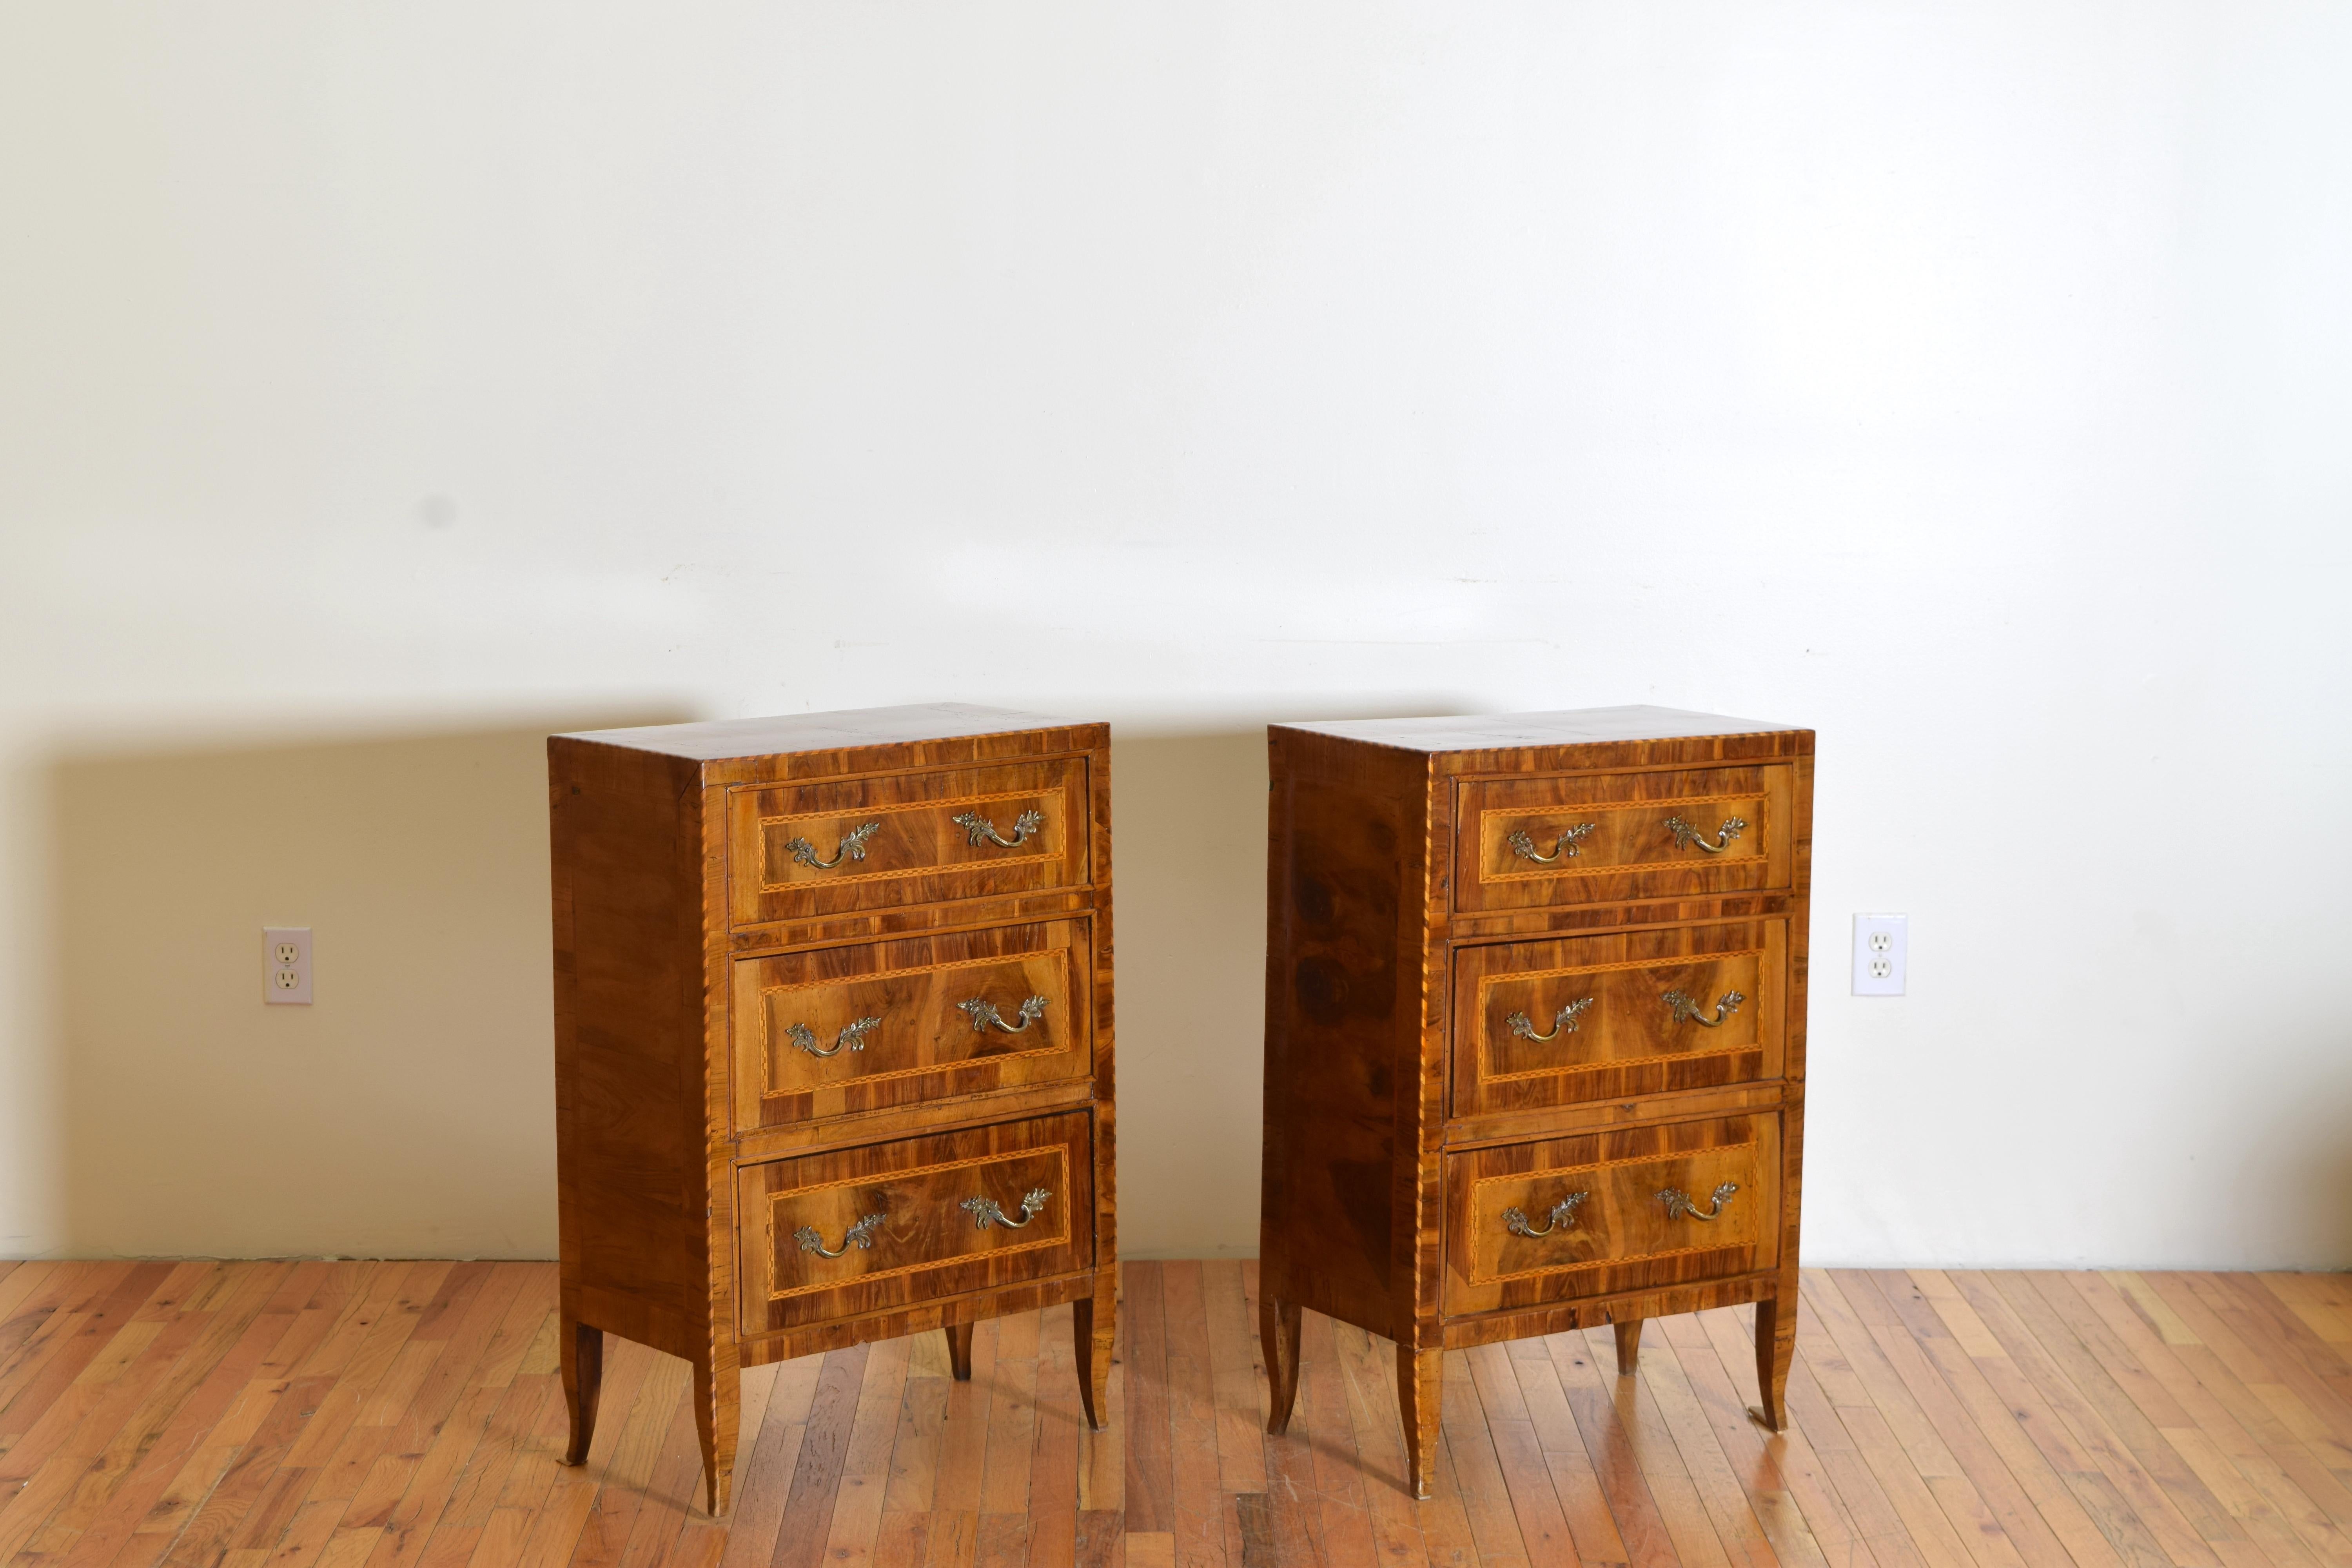 A pair of finely Inlaid and veneered walnut three-drawer commodes with brass hardware from the Veneto Region, Italy.